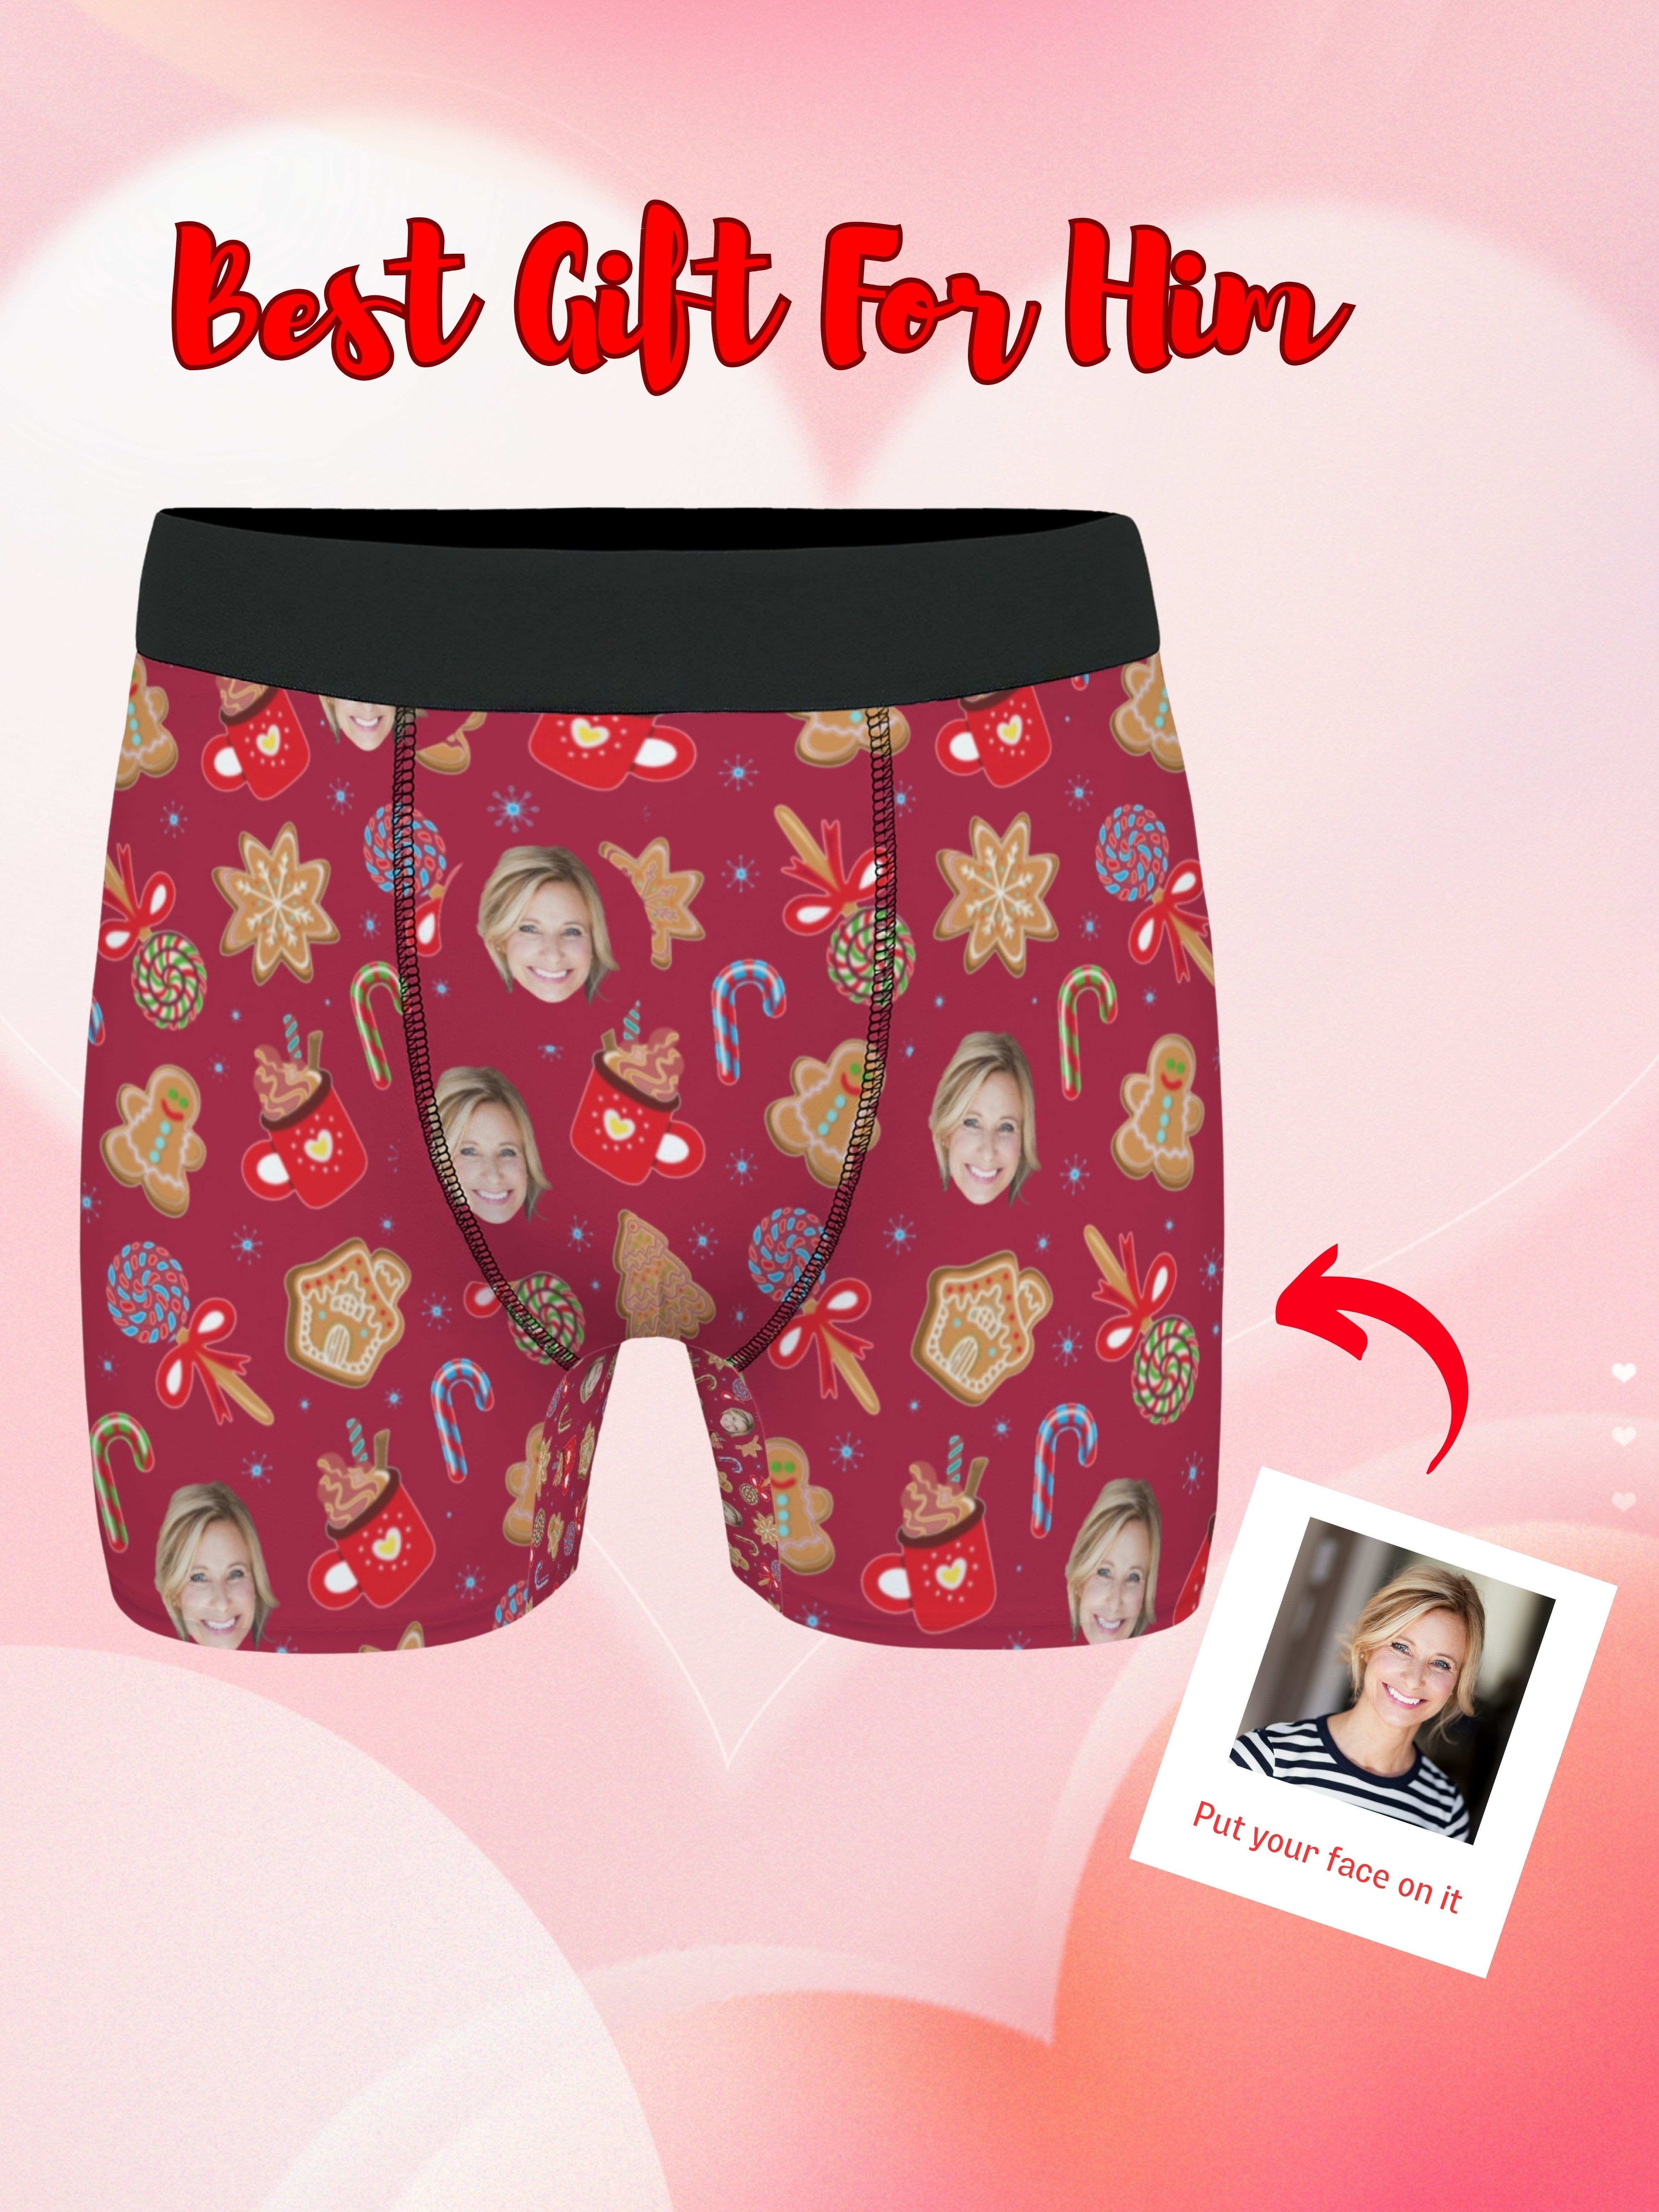 Custom Boxers for Men Boyfriend Husband Father, Personalized Face